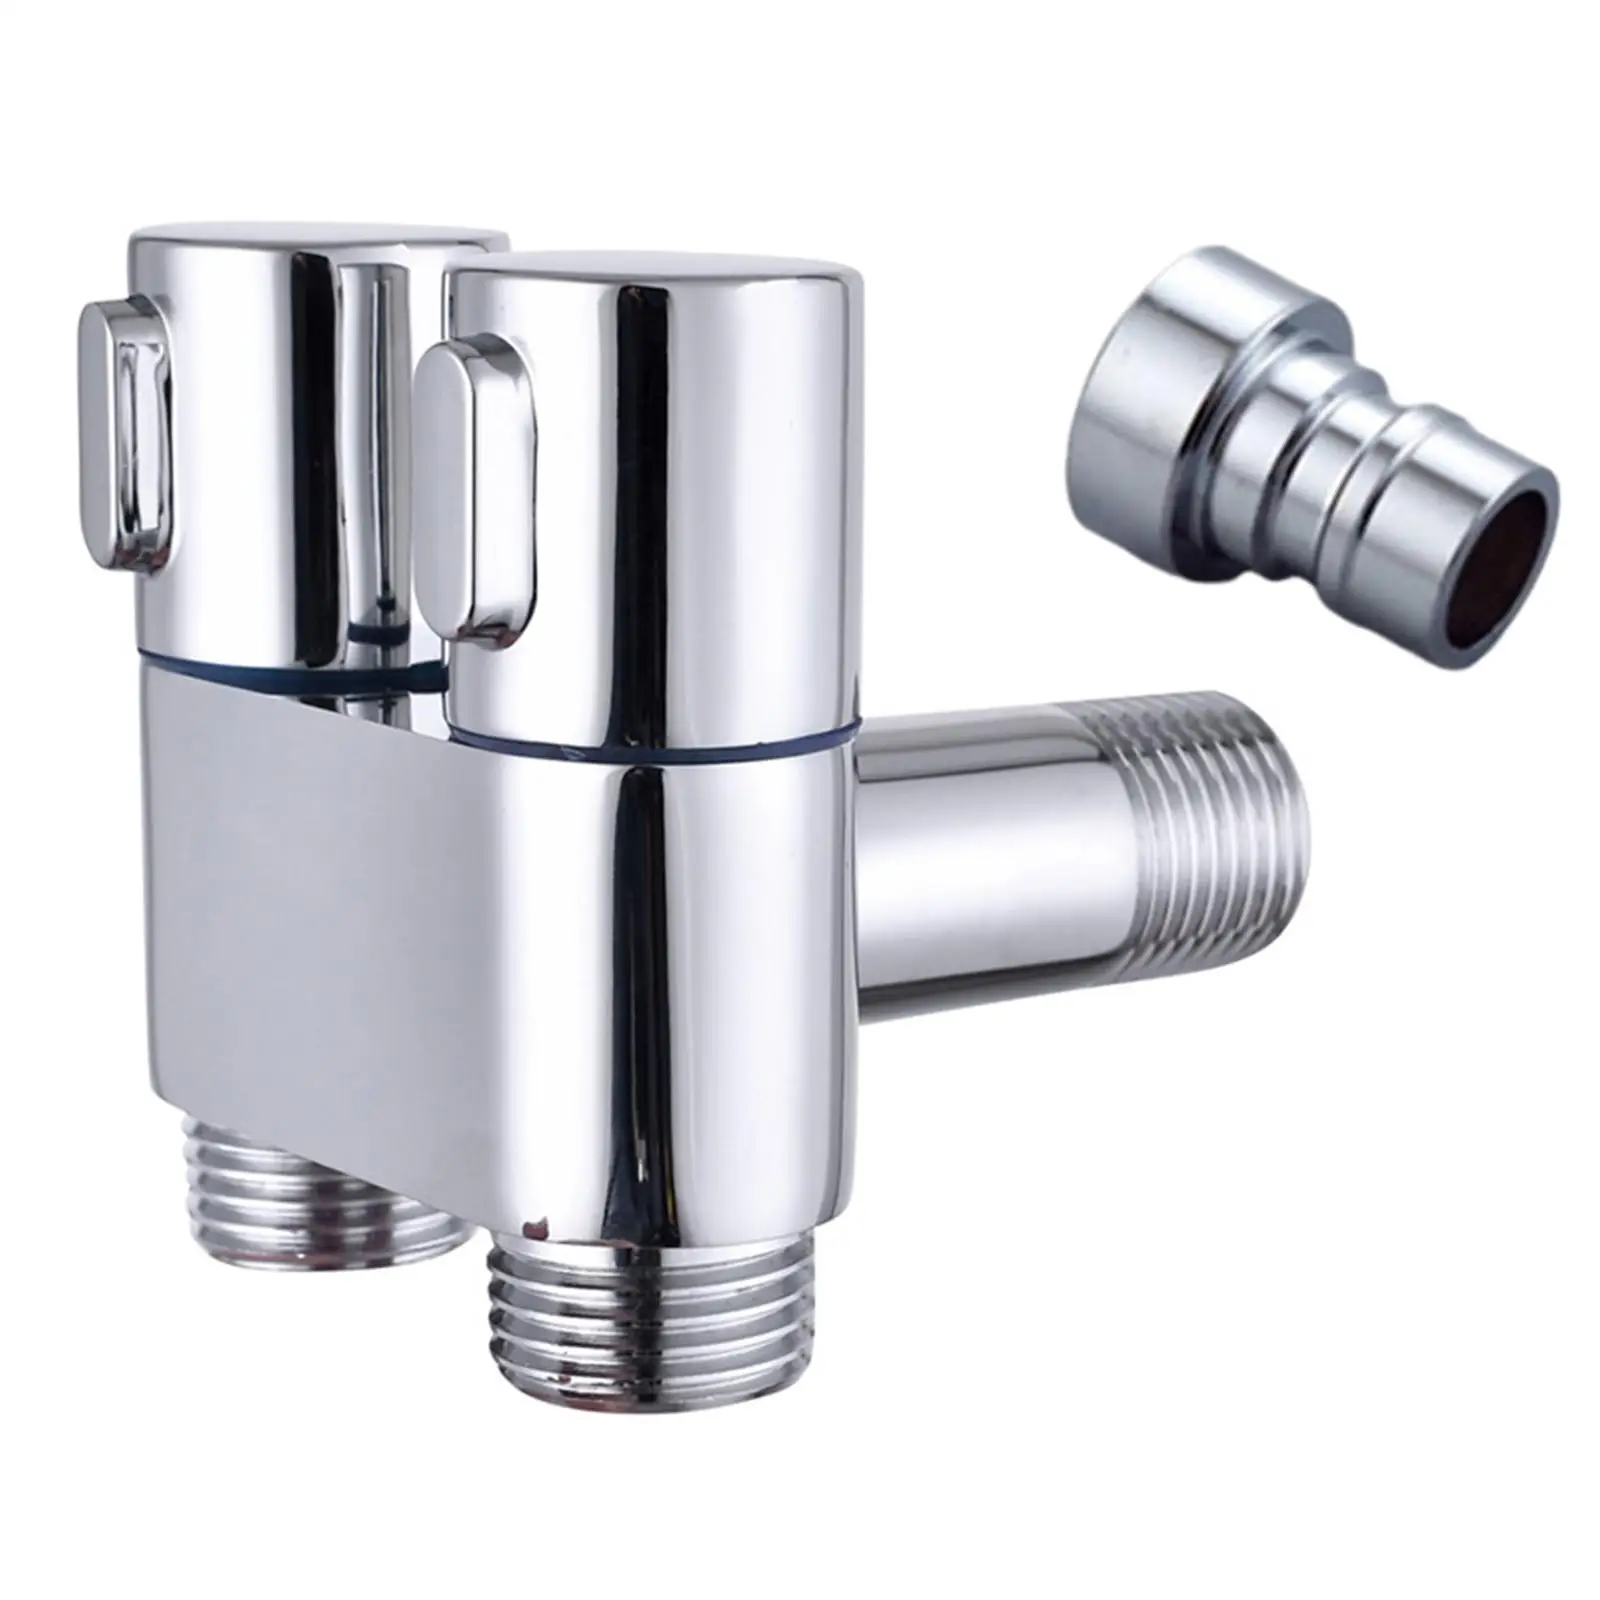 3 Through Angle Stop Valve Faucet Valve Water Flow G1/2 Thread Filling Valve for Home Cold ,Hot Water Basin Toilet Kitchen